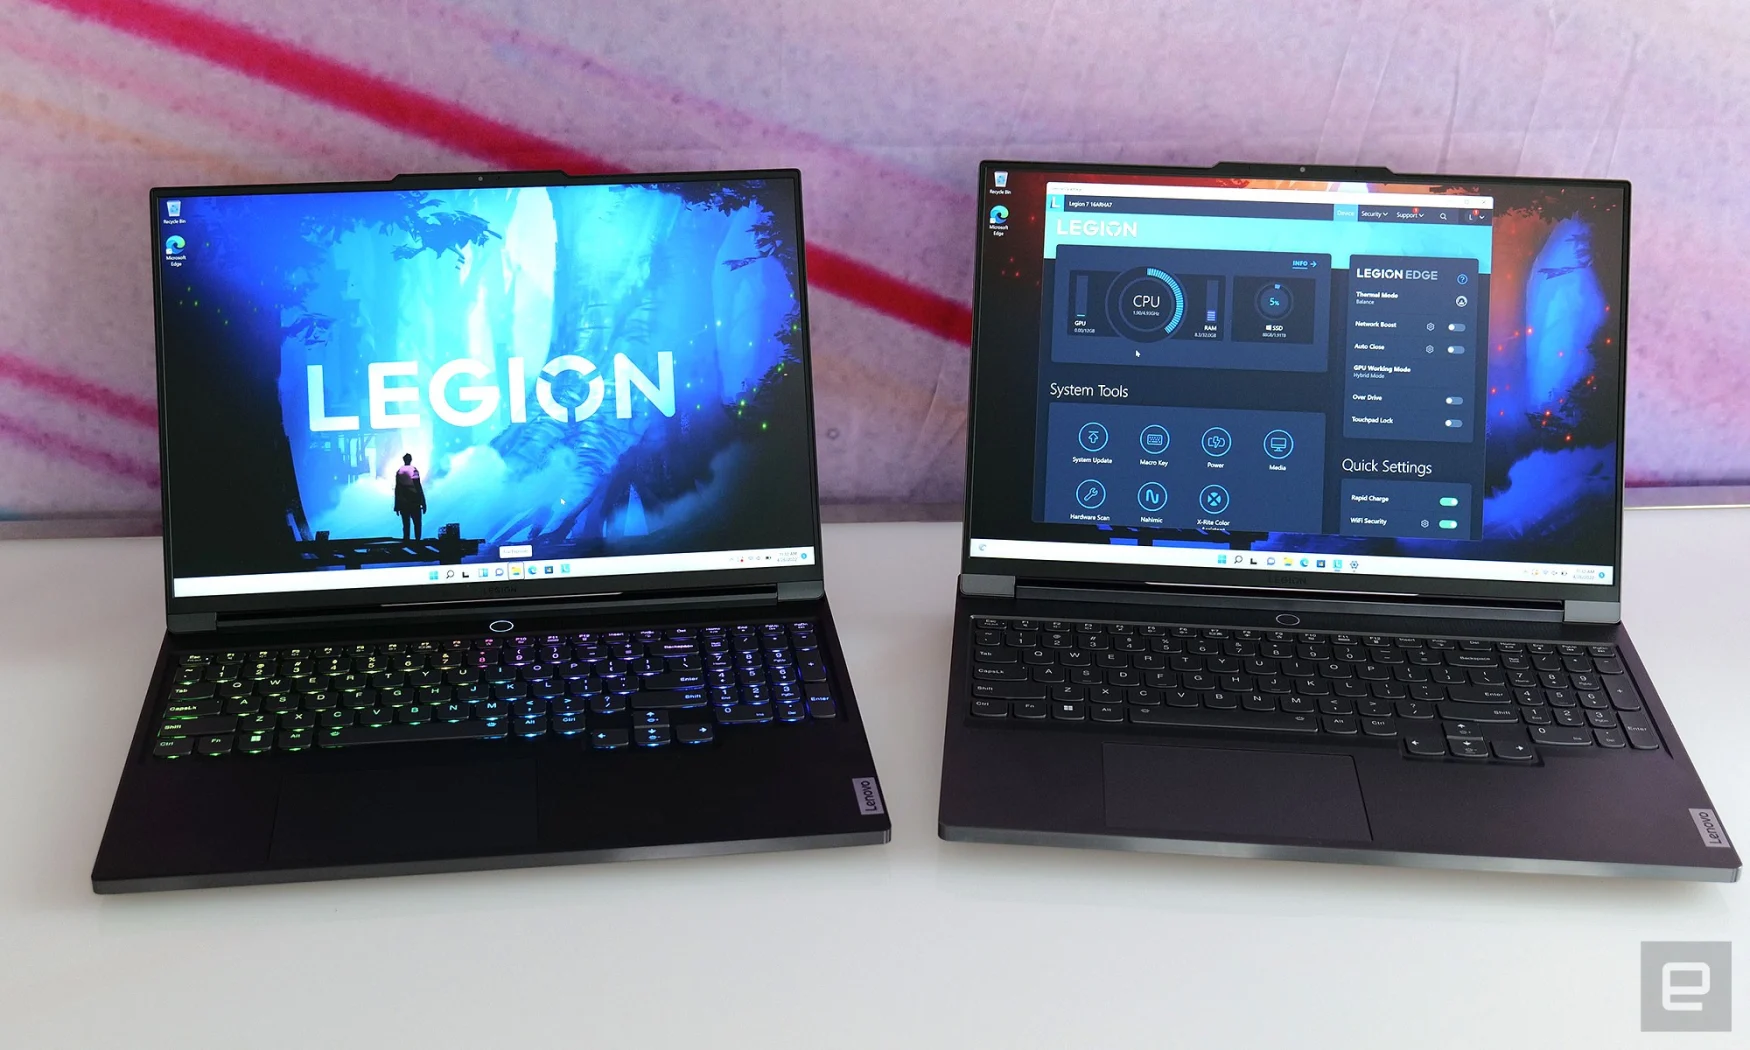 The standard Legion 7 (right) is thicker and heavier than the Legion 7 Slim (left), but it supports more powerful components and has a plethora of RGB lighting.